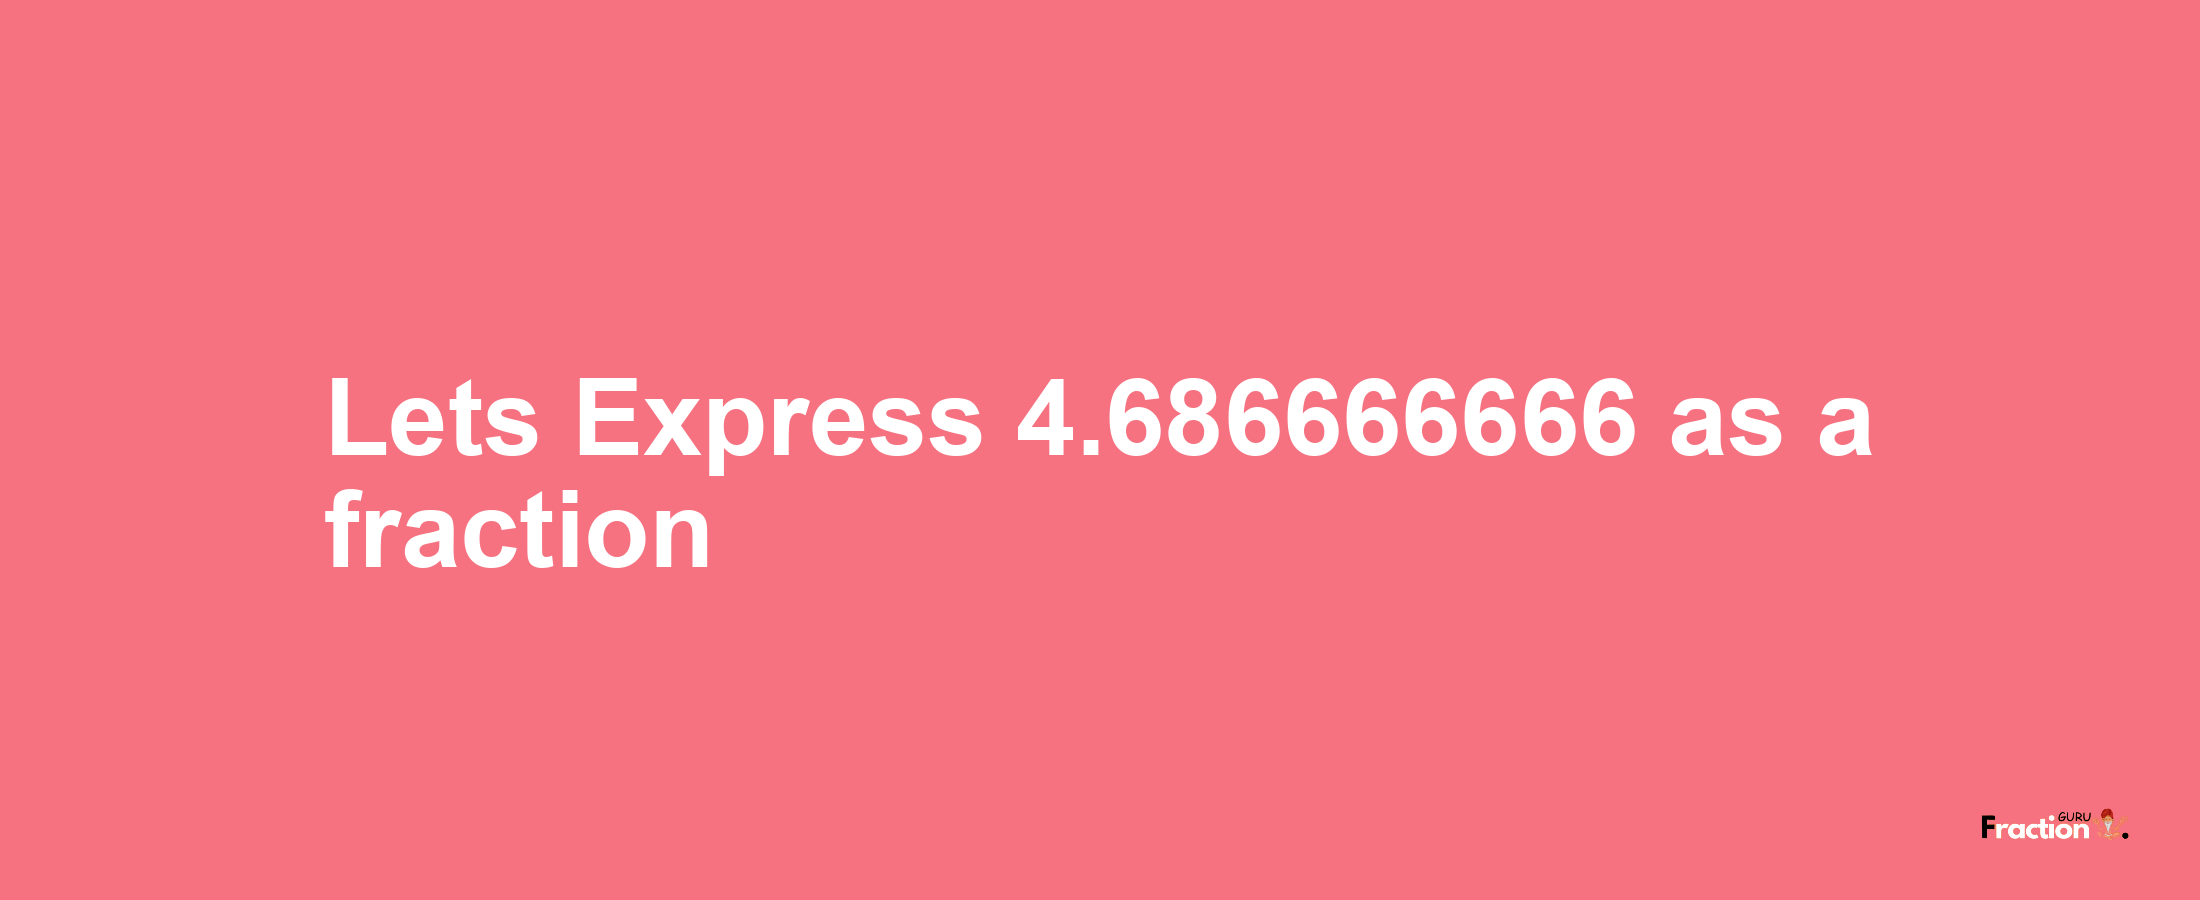 Lets Express 4.686666666 as afraction